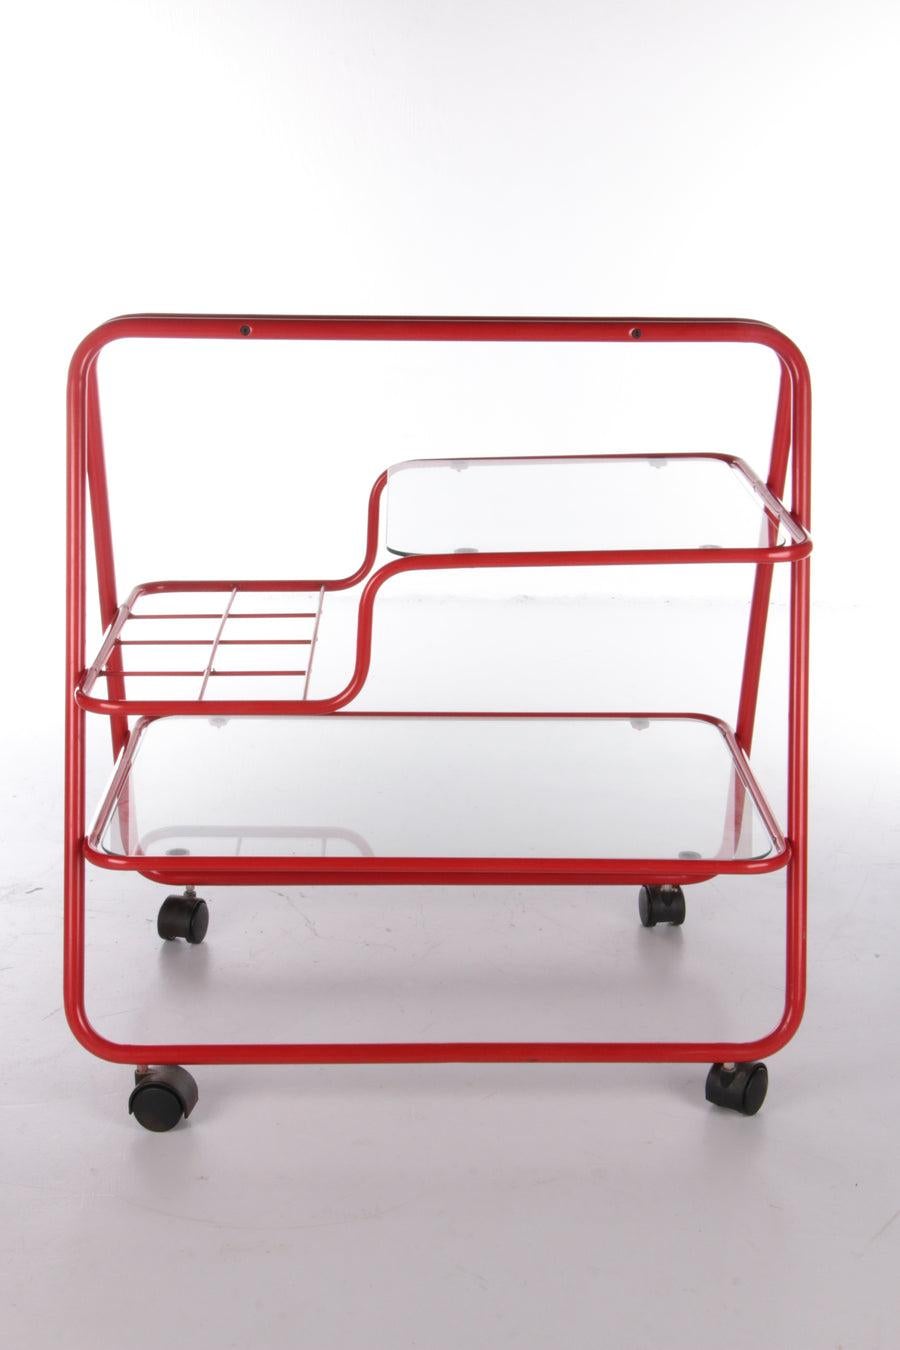 Vintage Red Metal Unique Trolley or Bar Cart, 1970s

Intage red metal unique trolley or bar cart, 1970s

This is a beautiful trolley from the 1970s.

The bottom leaf is made of glass and the top leaf is also glass, the frame is made of beautiful red